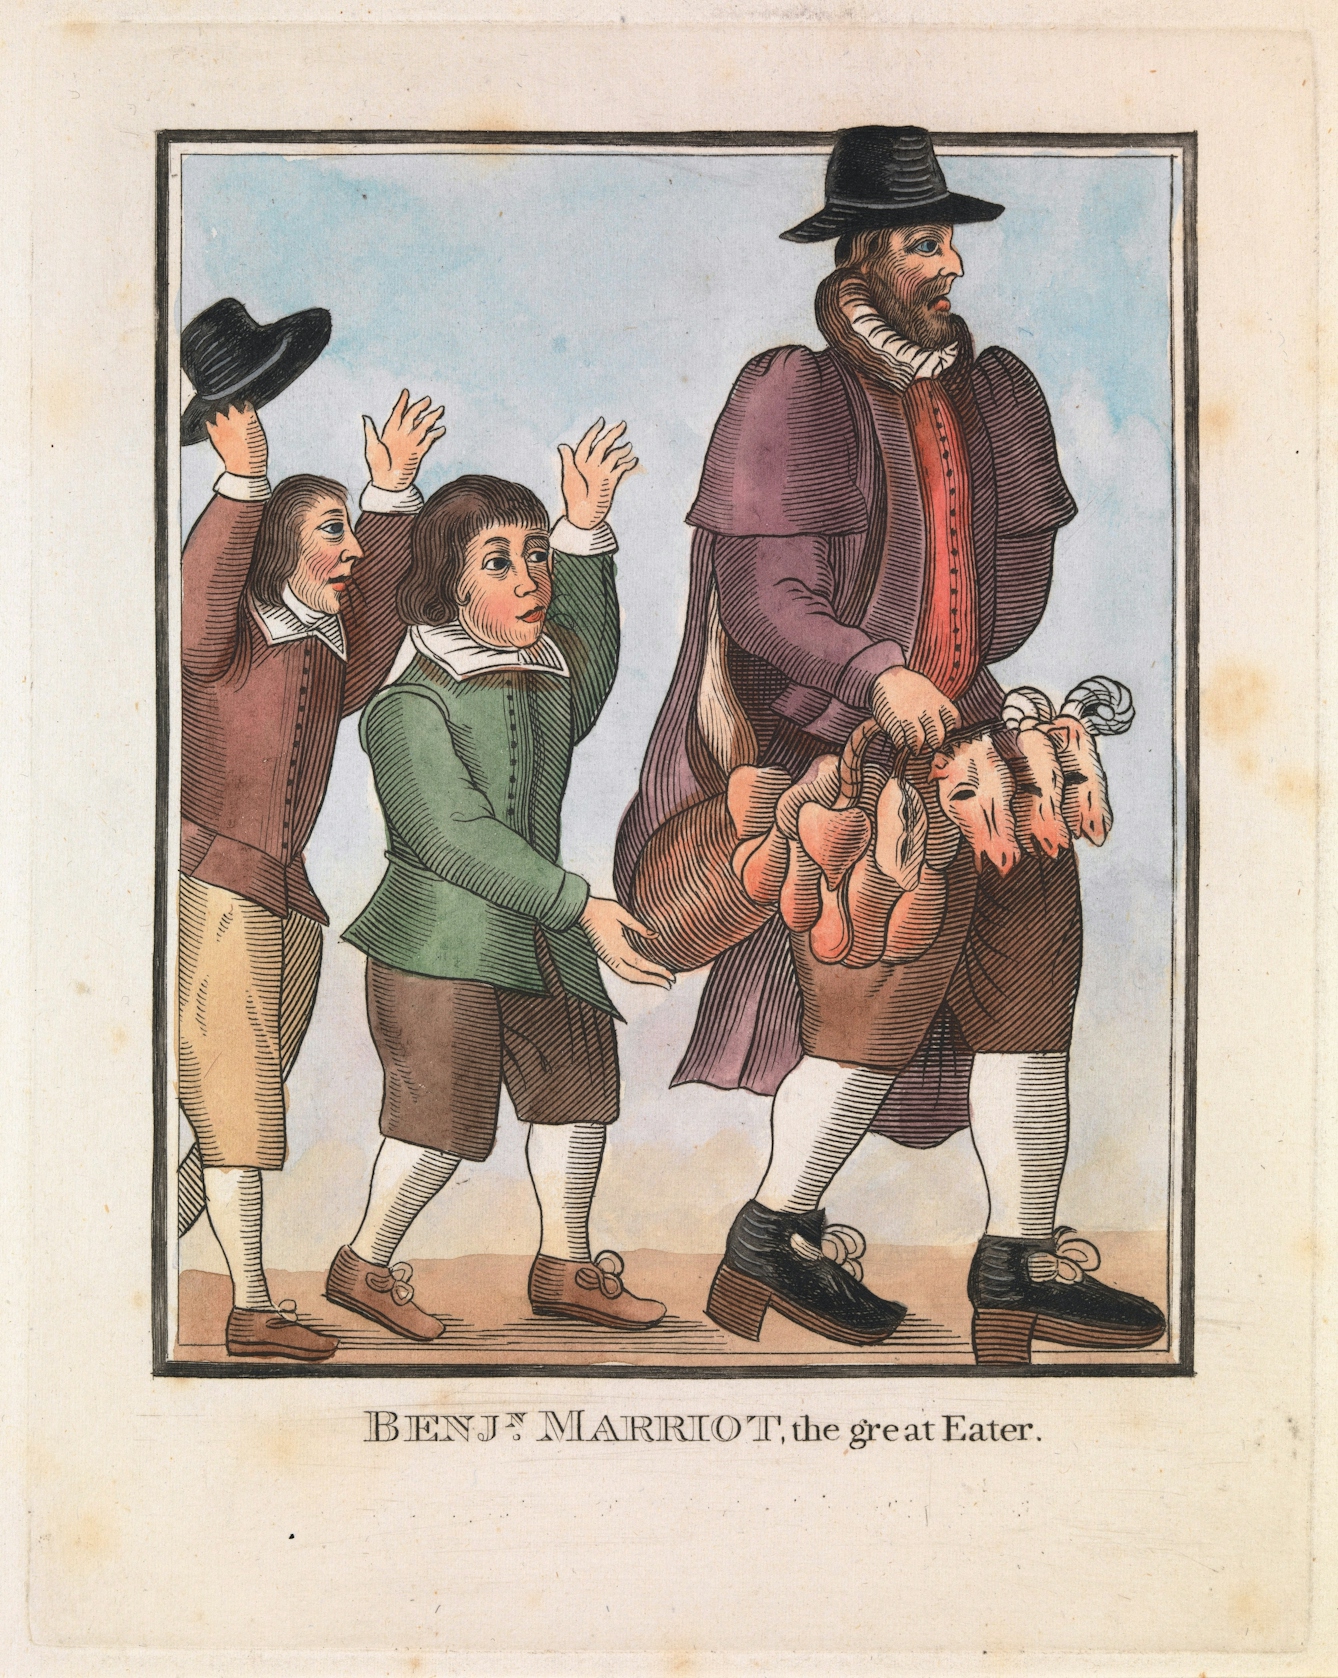 A tall man with animal heads hanging from his belt is pursued by two jeering children.